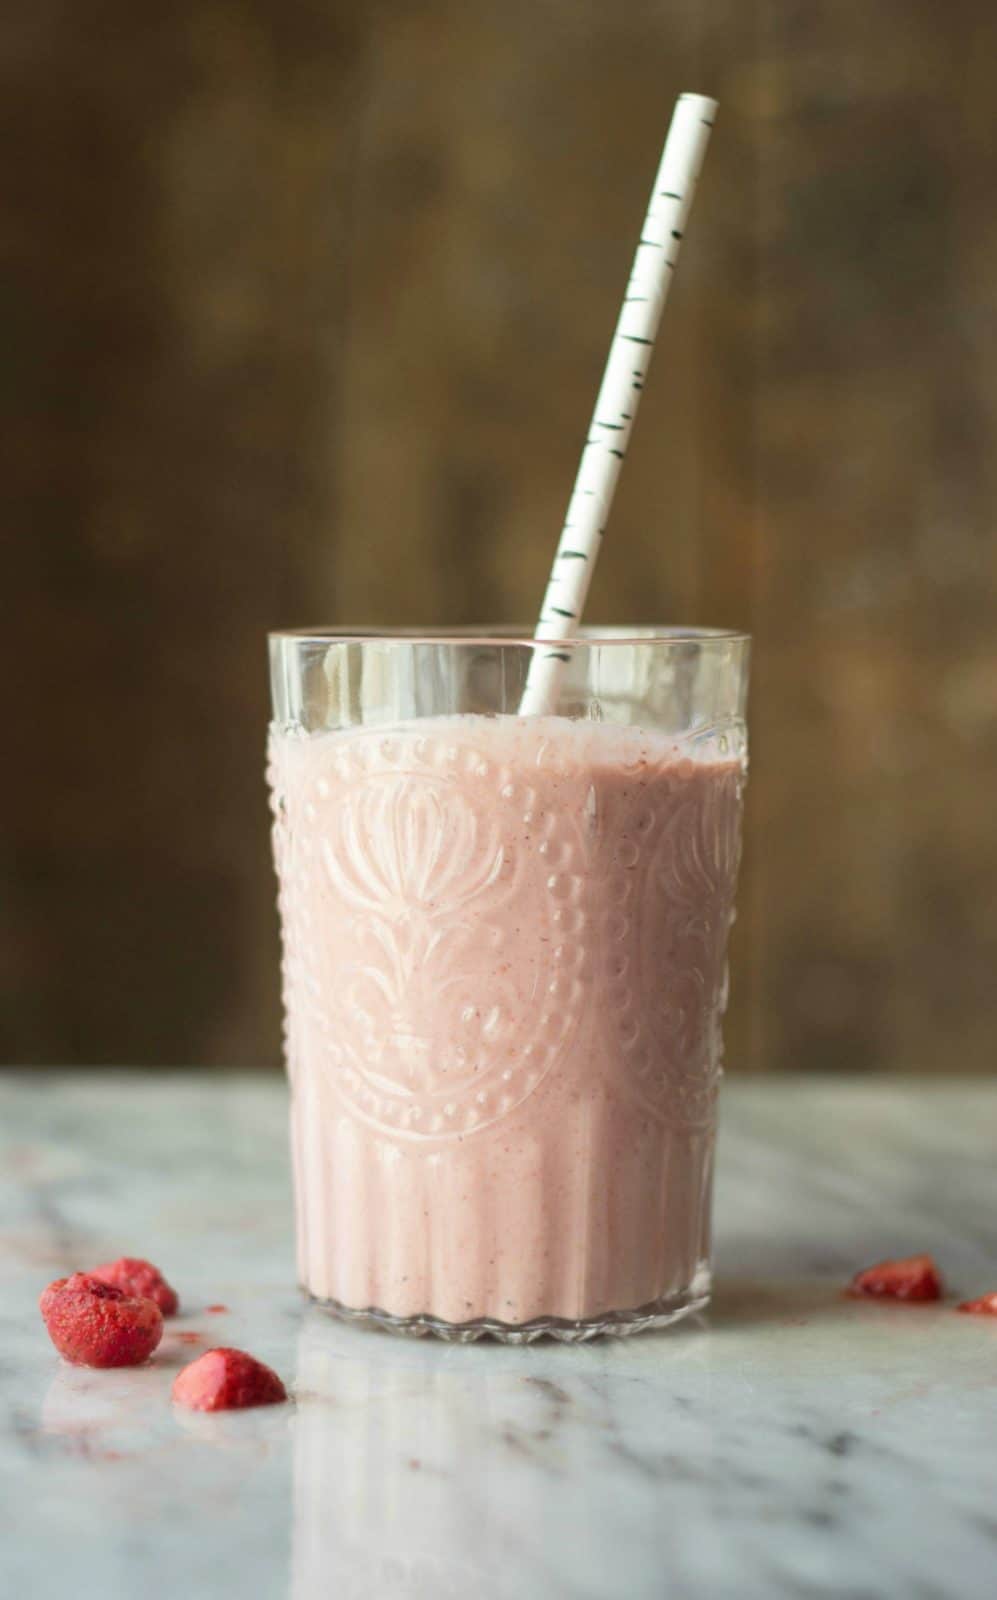 Side view of one strawberry banana cashew smoothie in a clear glass cup with a straw.